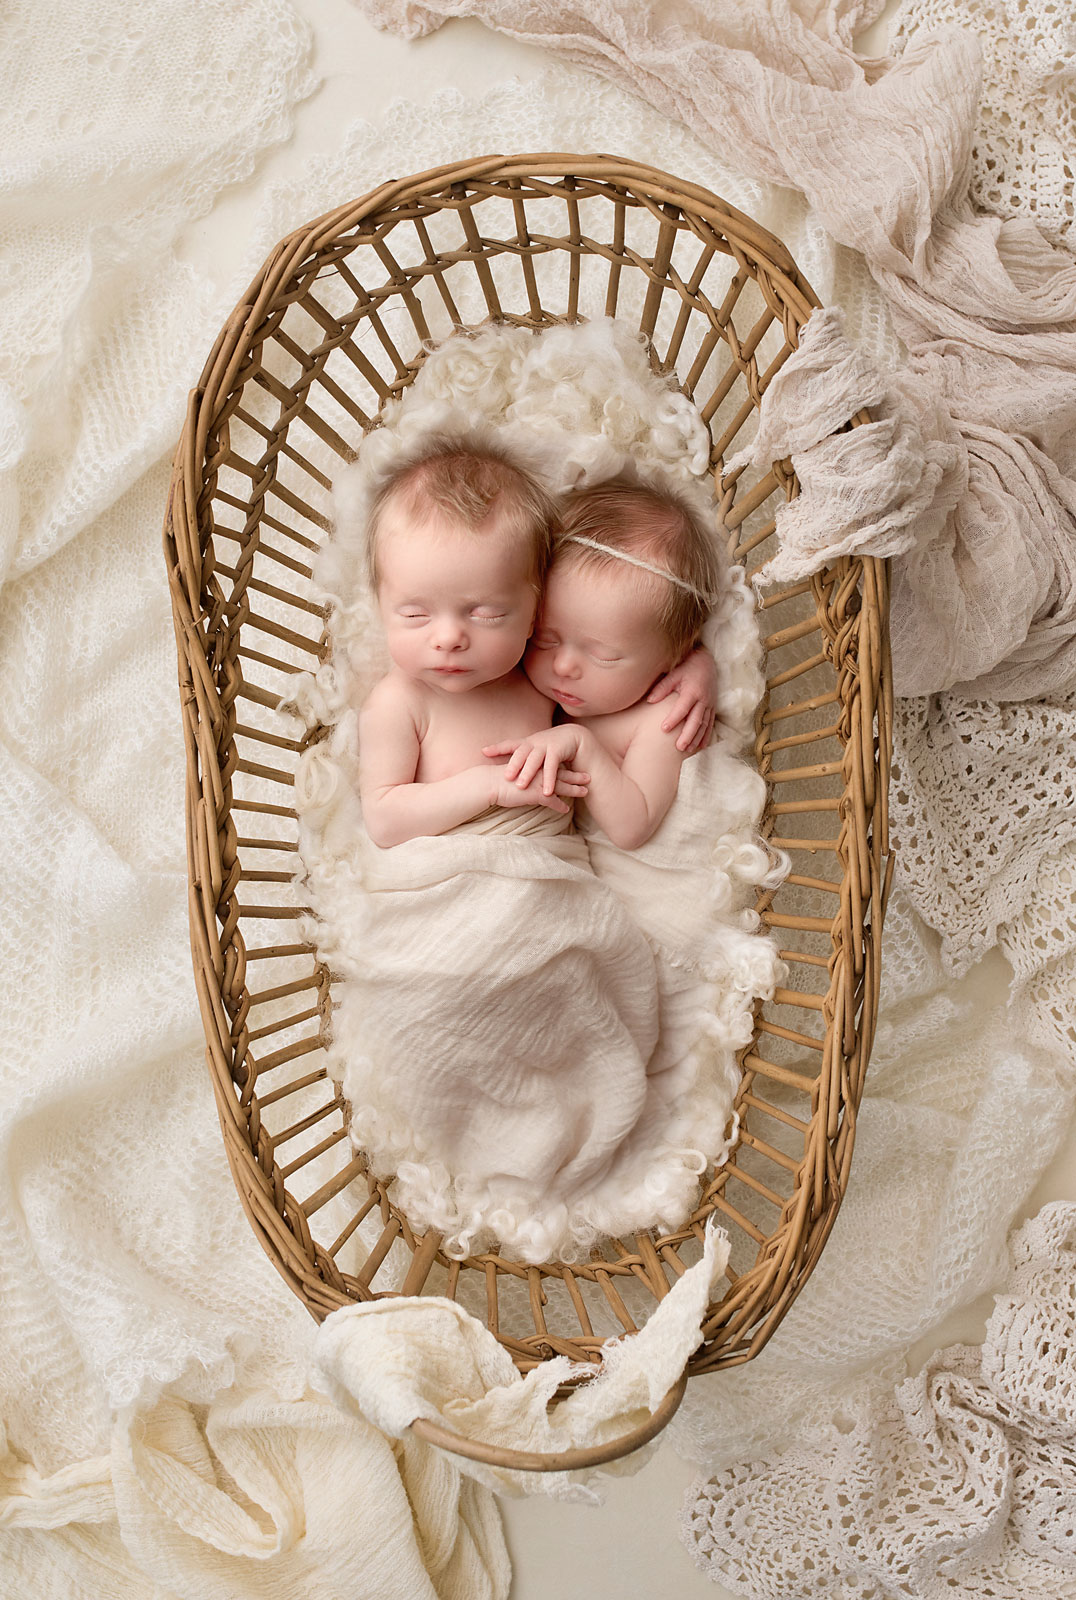 v\newborn photo ideas for photography session twins